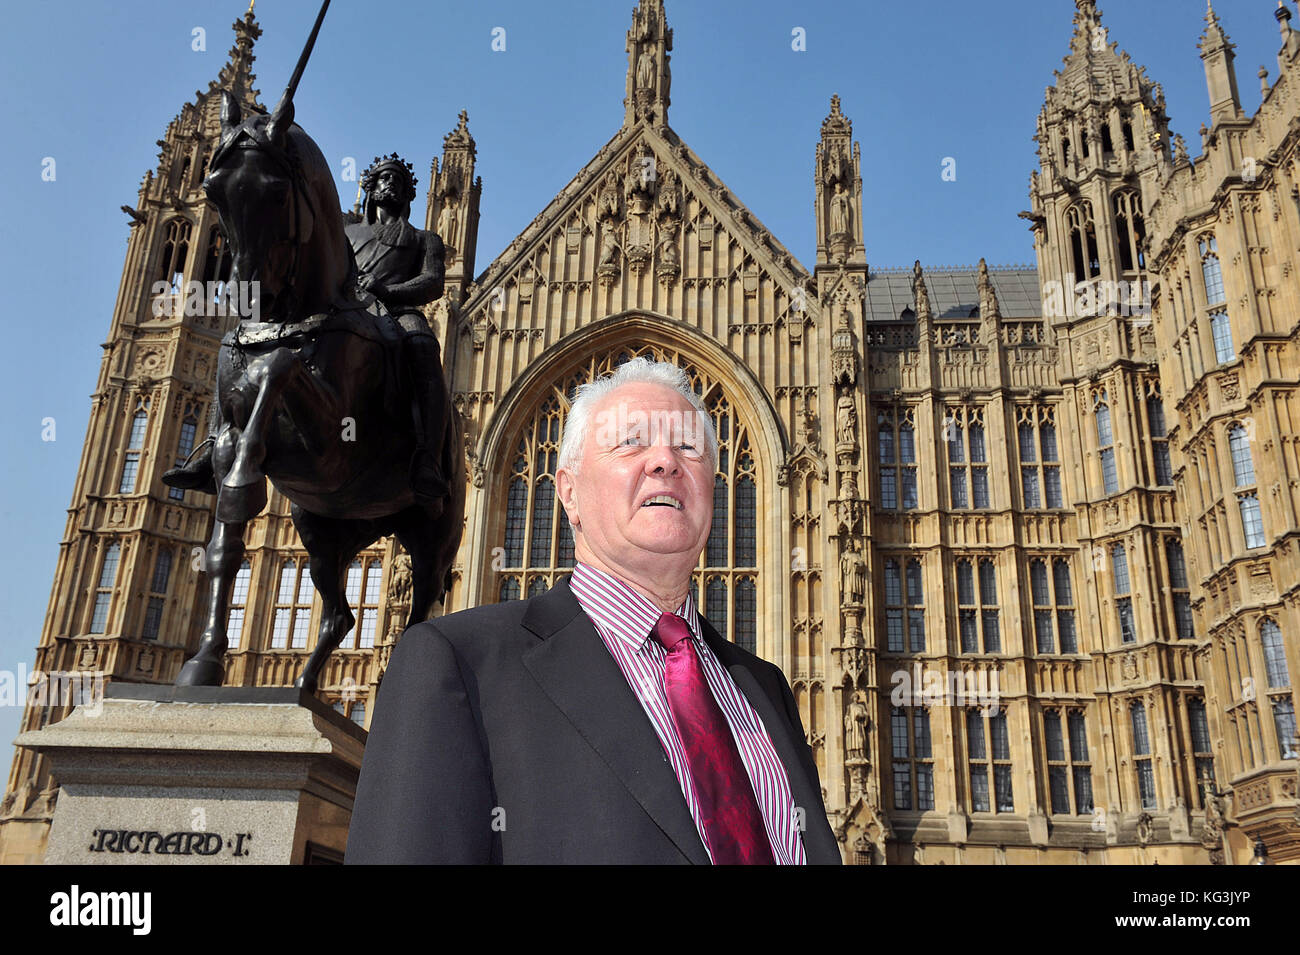 John Francis McFall, Baron McFall of Alcluith PC is a British politician, who currently serves as the Senior Deputy Speaker of the House of Lords. Stock Photo